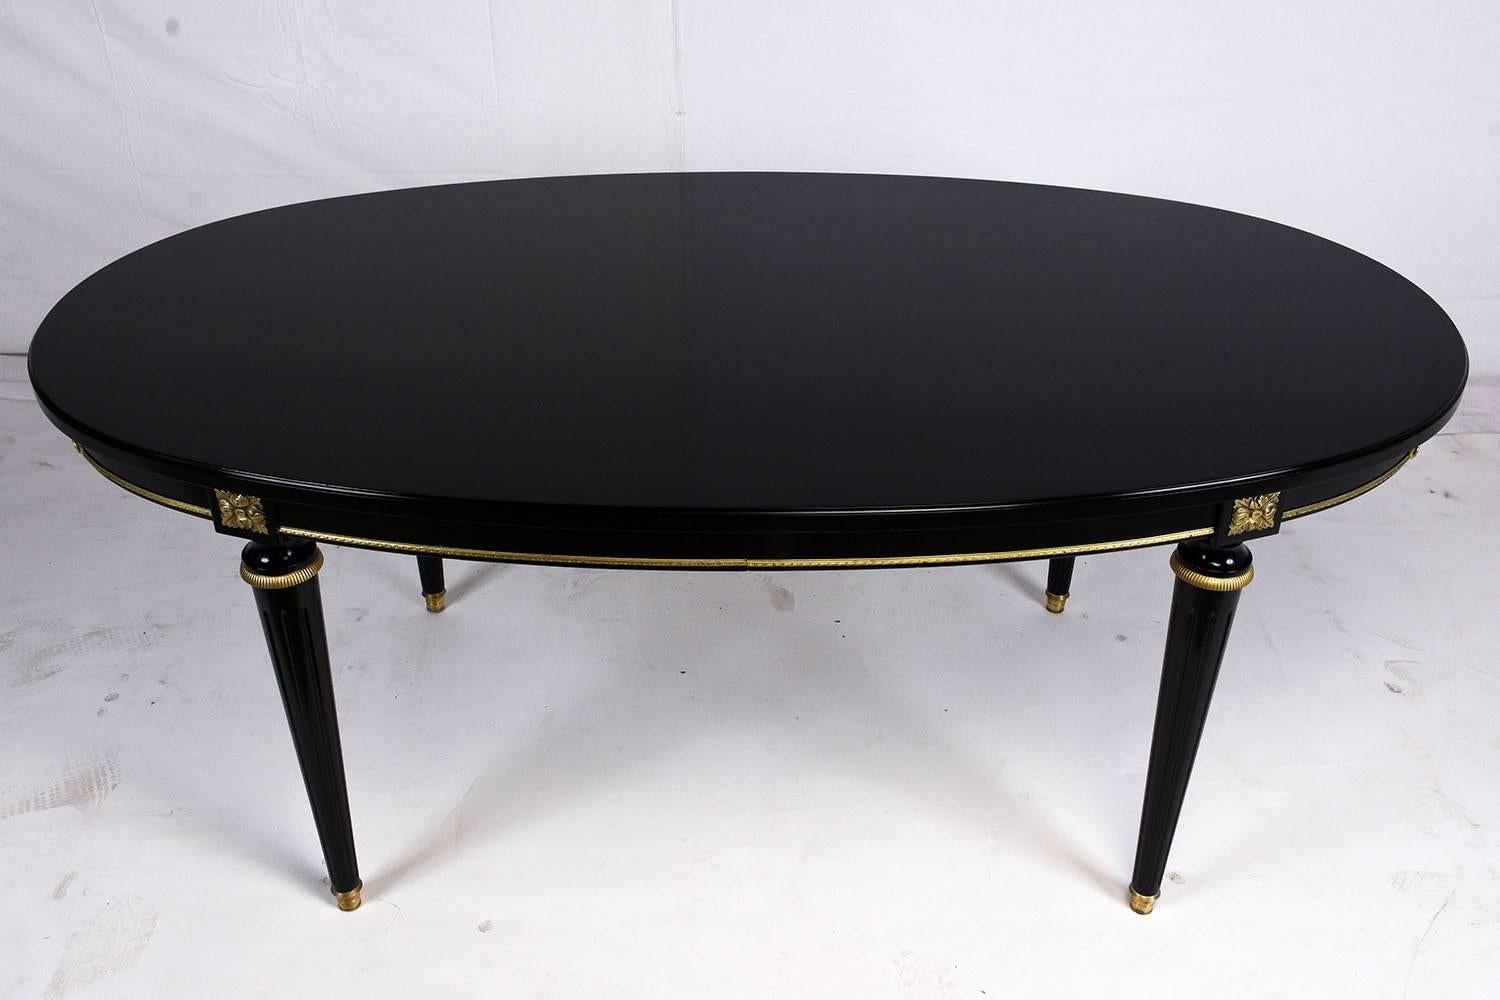 This 1960s French Louis XVI-style dining room table is made of mahogany wood with a beautiful ebonized finish. The oval table is accented by carved wood details of rosettes and beaded bands that have been finished in a gold color. The turned legs